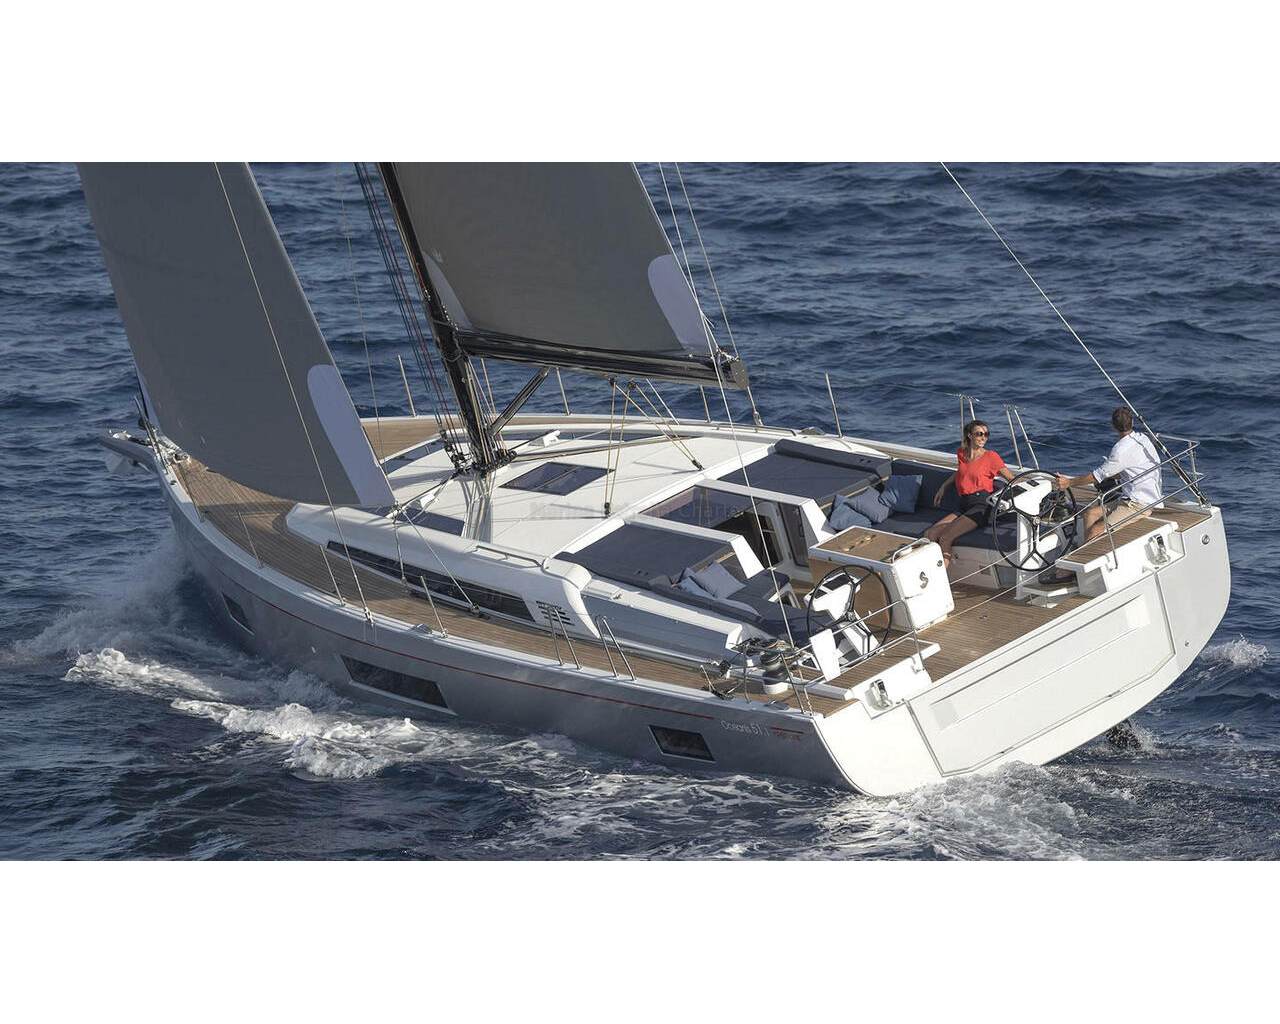 Sail boat FOR CHARTER, year 2023 brand Beneteau and model Oceanis 51.1, available in Can Pastilla Palma Mallorca España